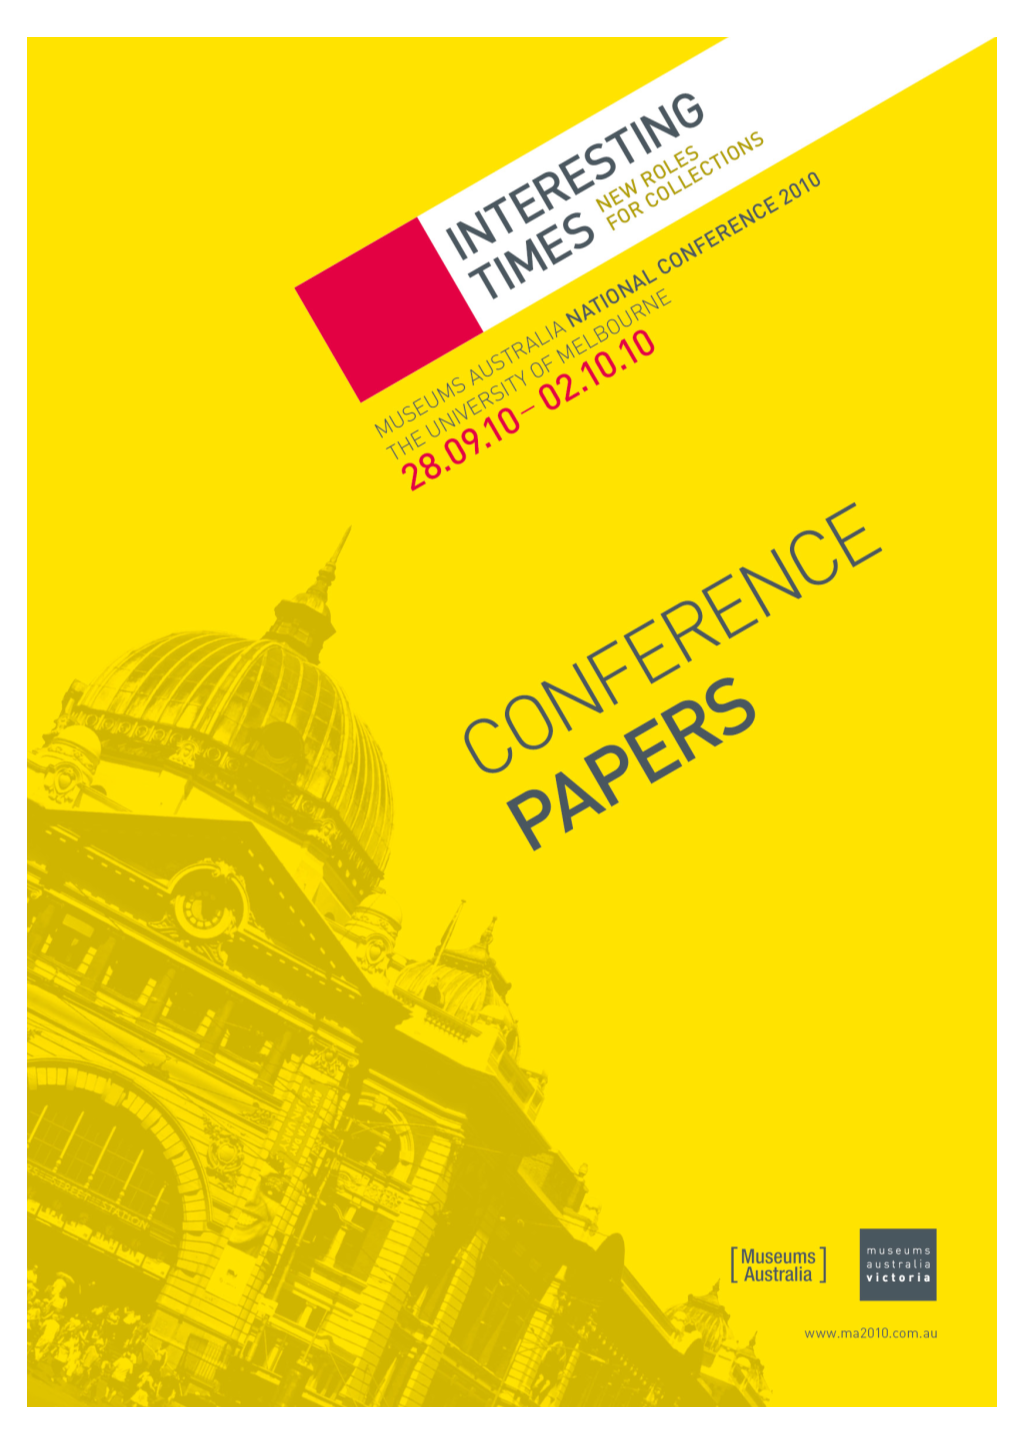 Conference Papers